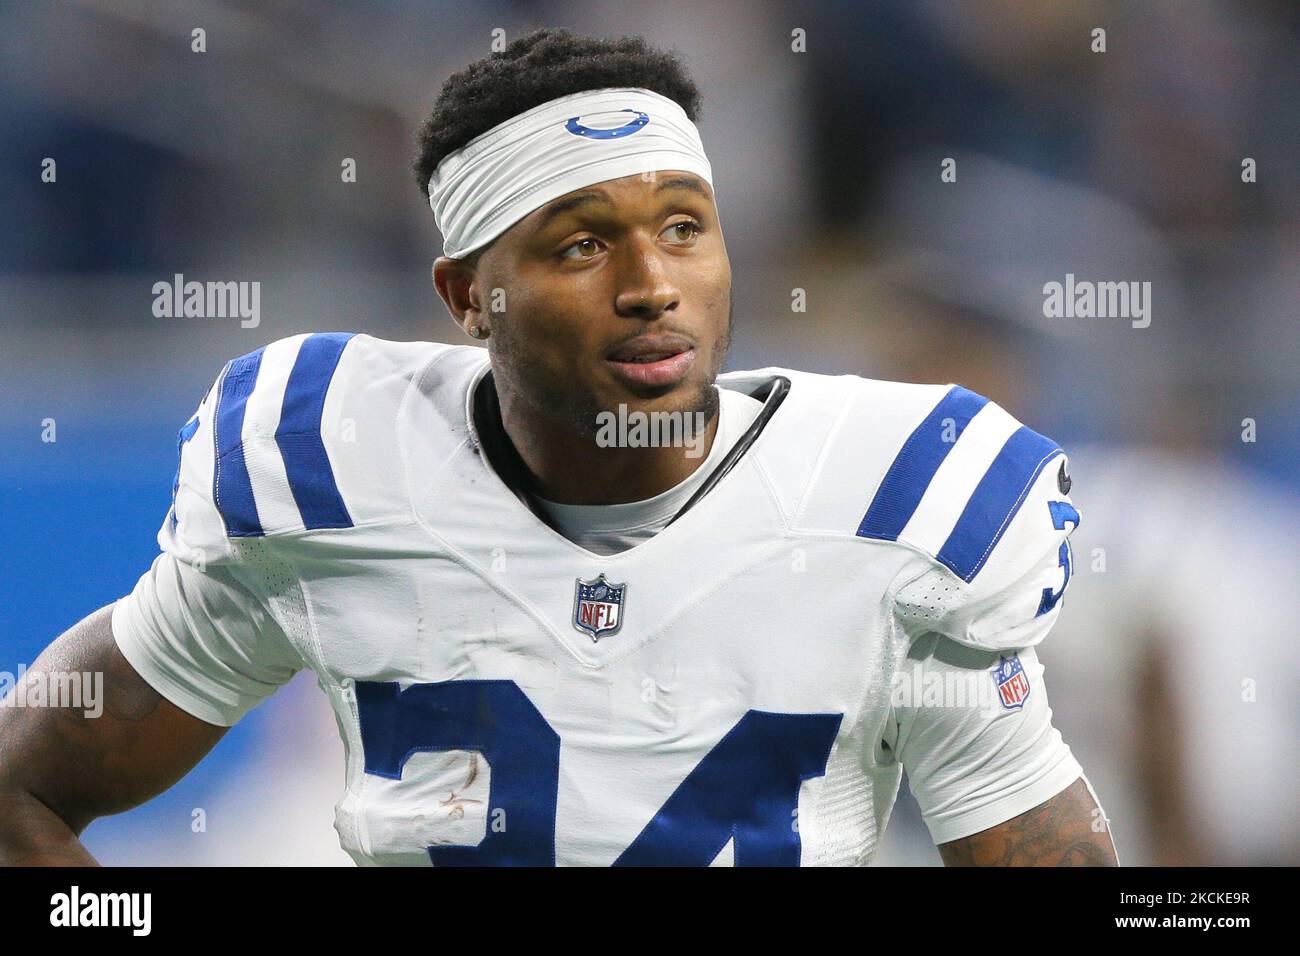 Indianapolis Colts cornerback Isaiah Rodgers (34) is seen after the coclusion of the preseason NFL football game against the Detroit Lions in Detroit, Michigan USA, on Friday, August 27, 2021. (Photo by Jorge Lemus/NurPhoto) Stock Photo